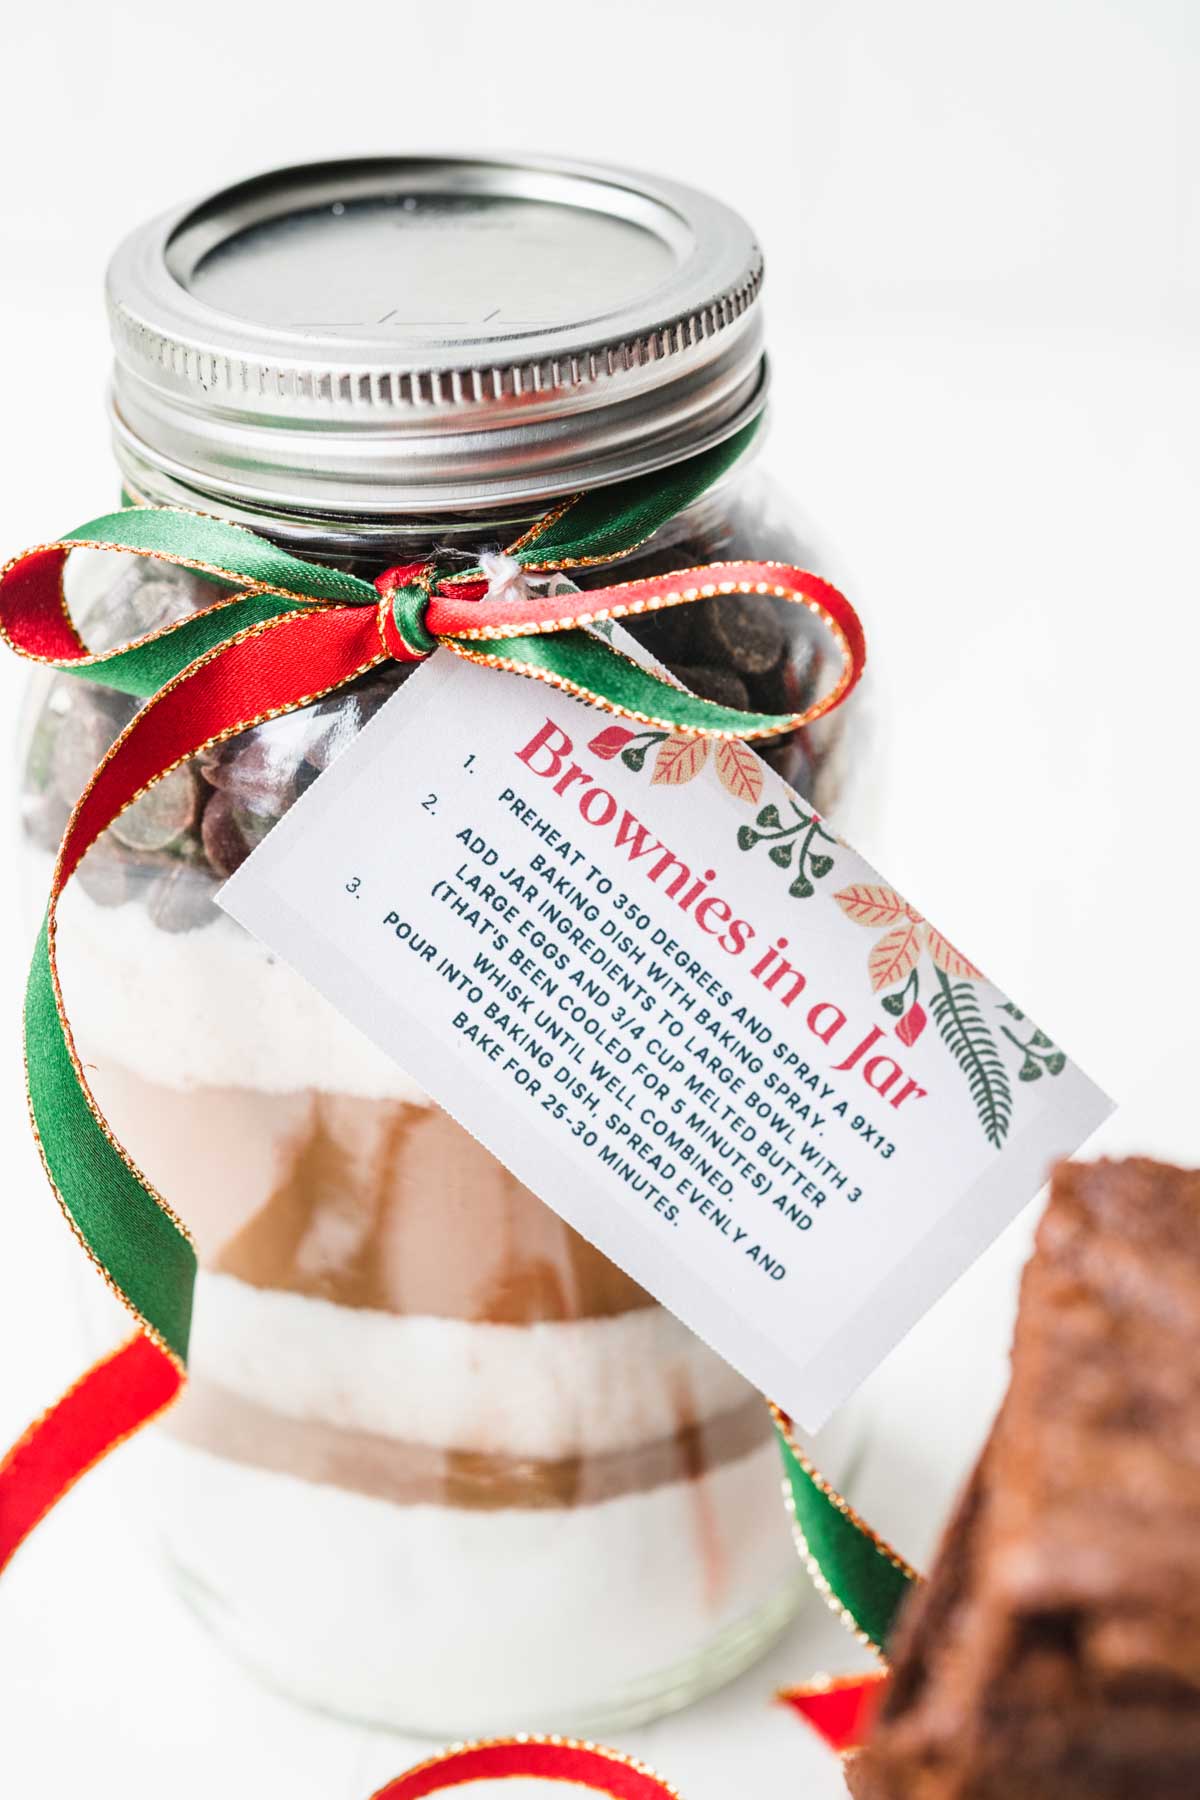 Brownies in a Jar with layered ingredients and gift tag